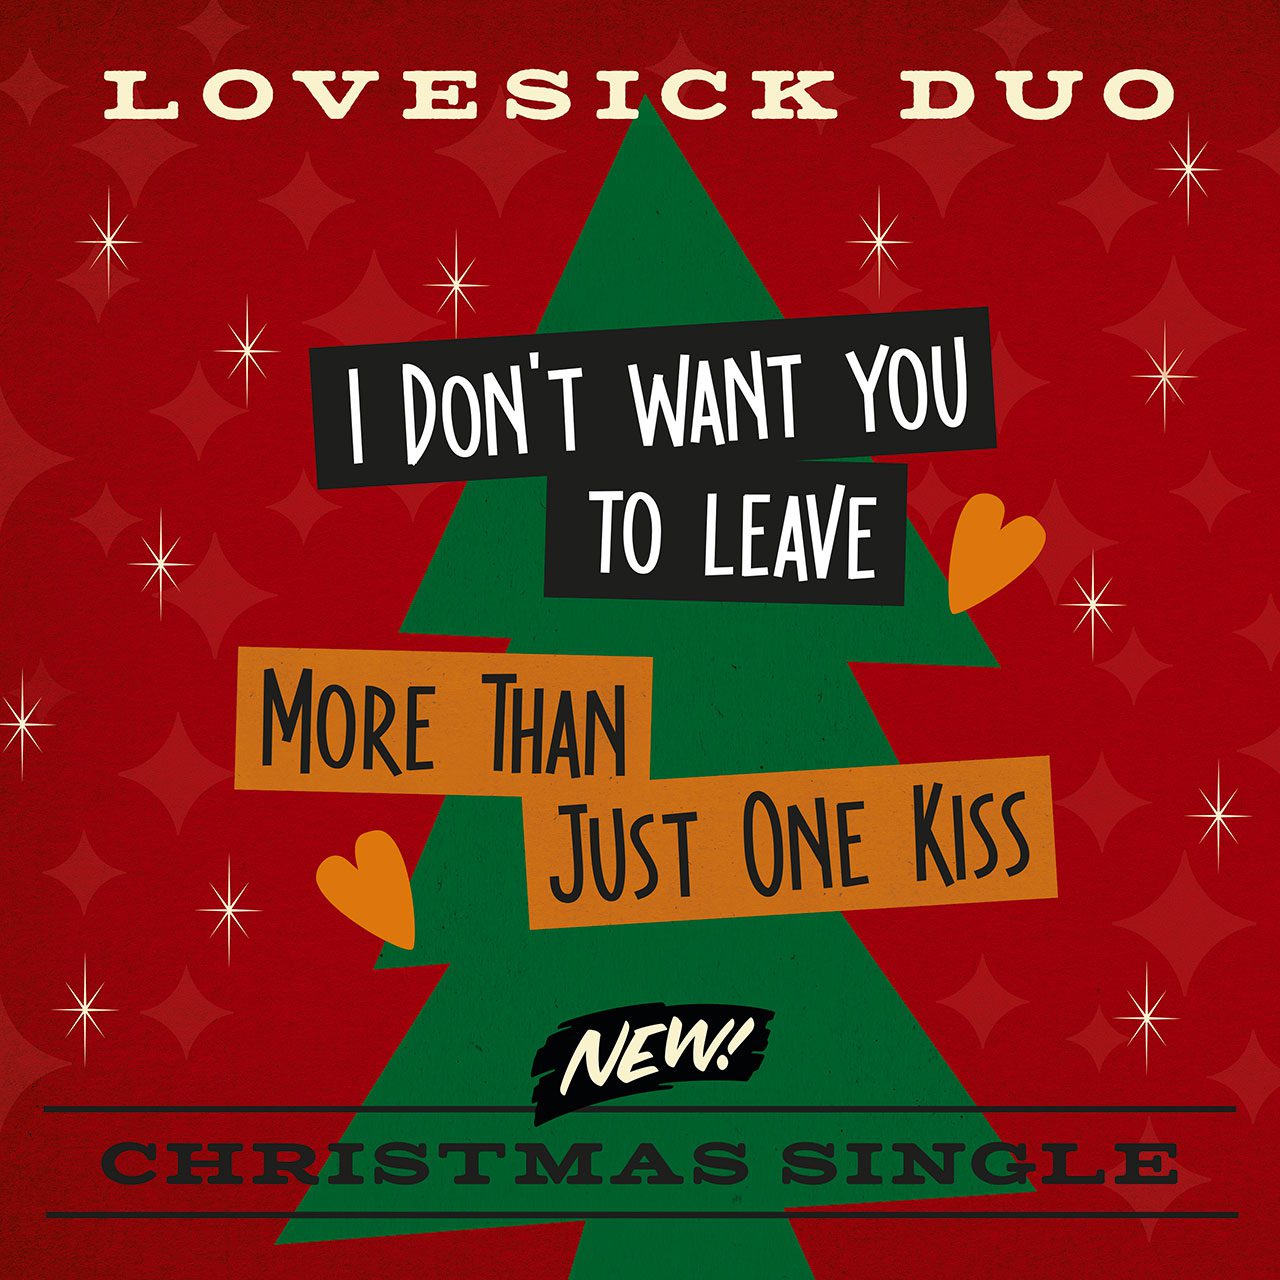 LOVESICK DUO, COVER SINGOLO DI NATALE ‘I DON’T WANT YOU TO LEAVE’